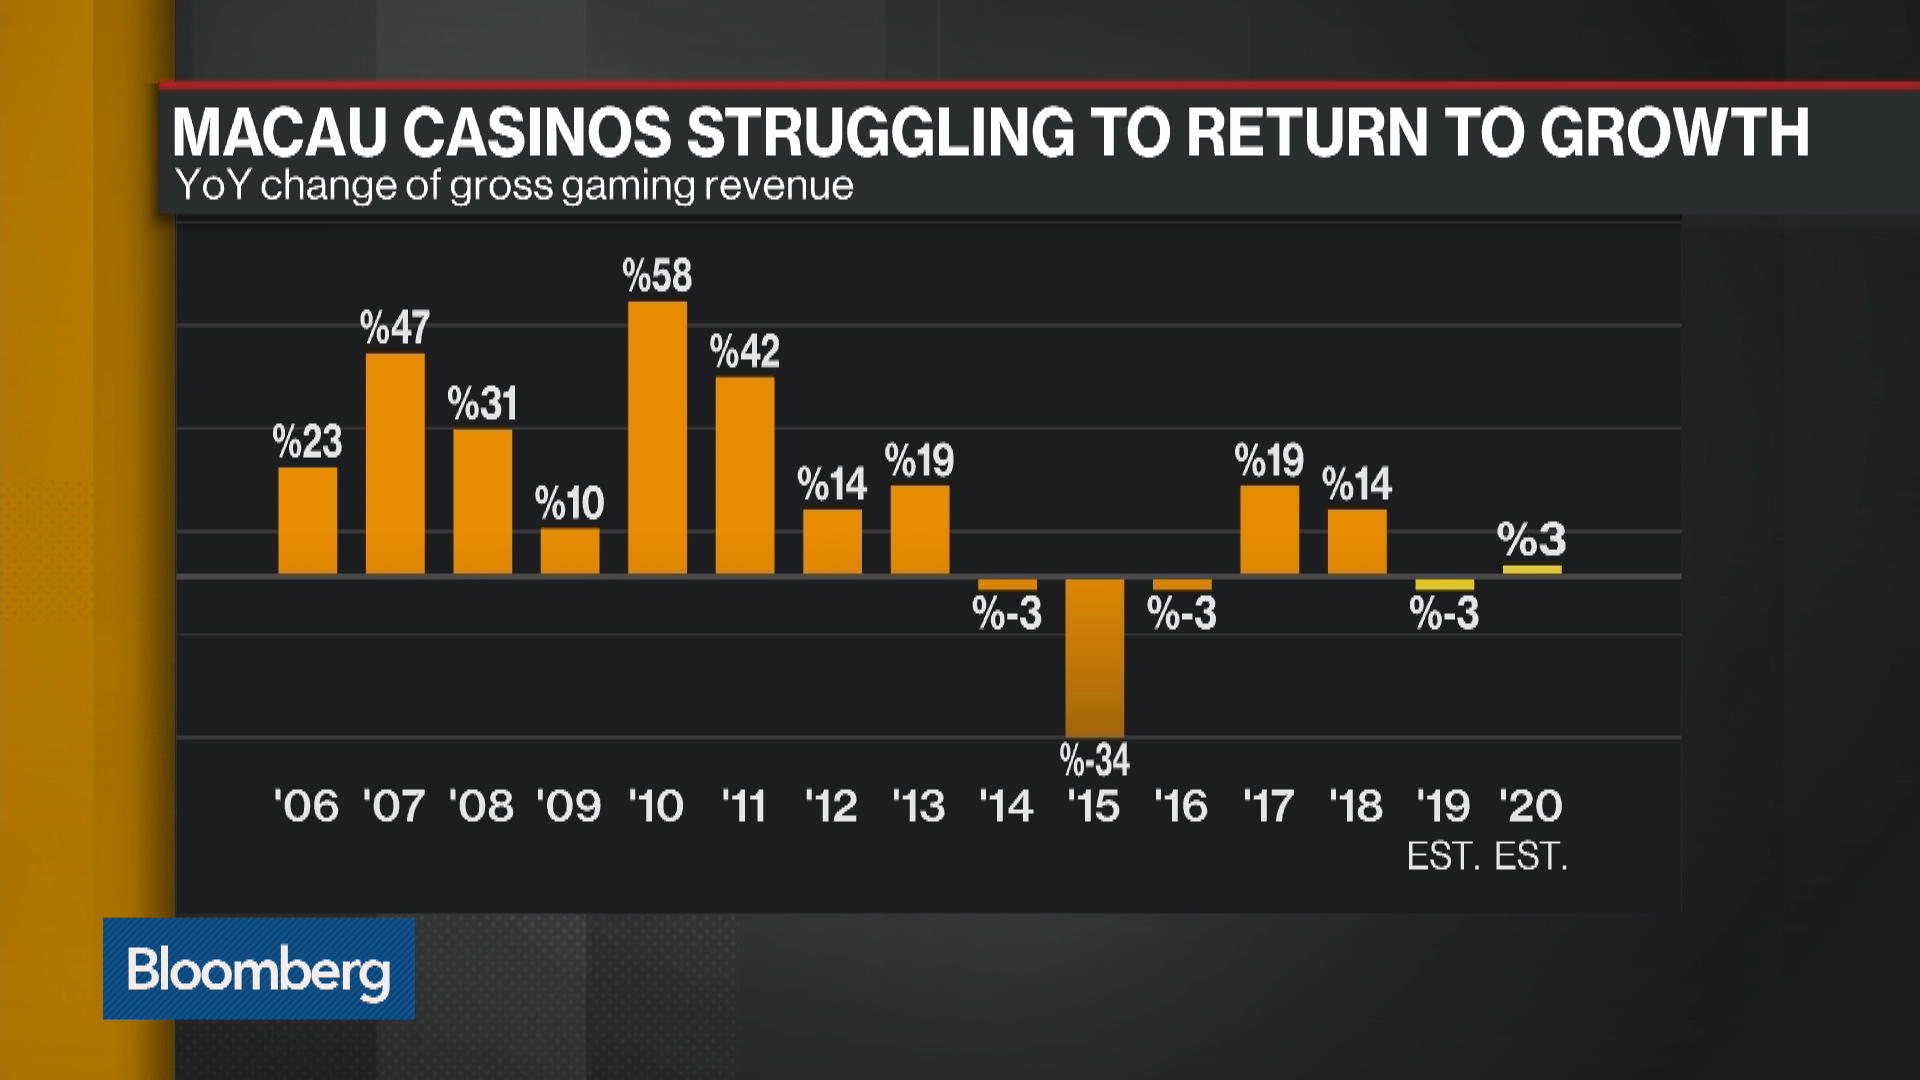 Revenue more than doubles for Sands, thanks to visitation rebound in Macao, Casinos & Gaming